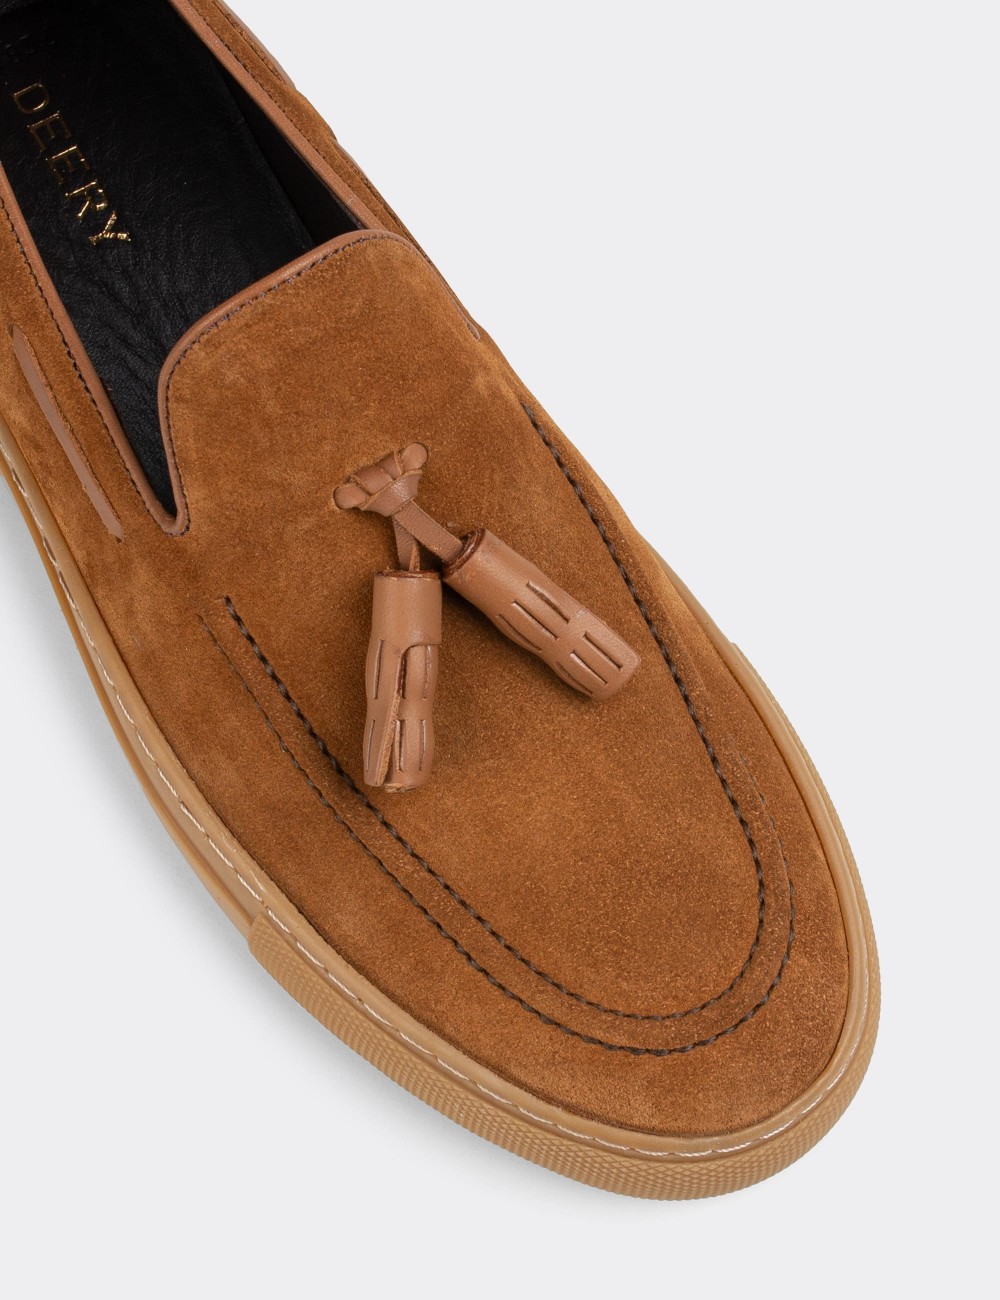 Tan Suede Leather Sneakers - 01836MTBAC01